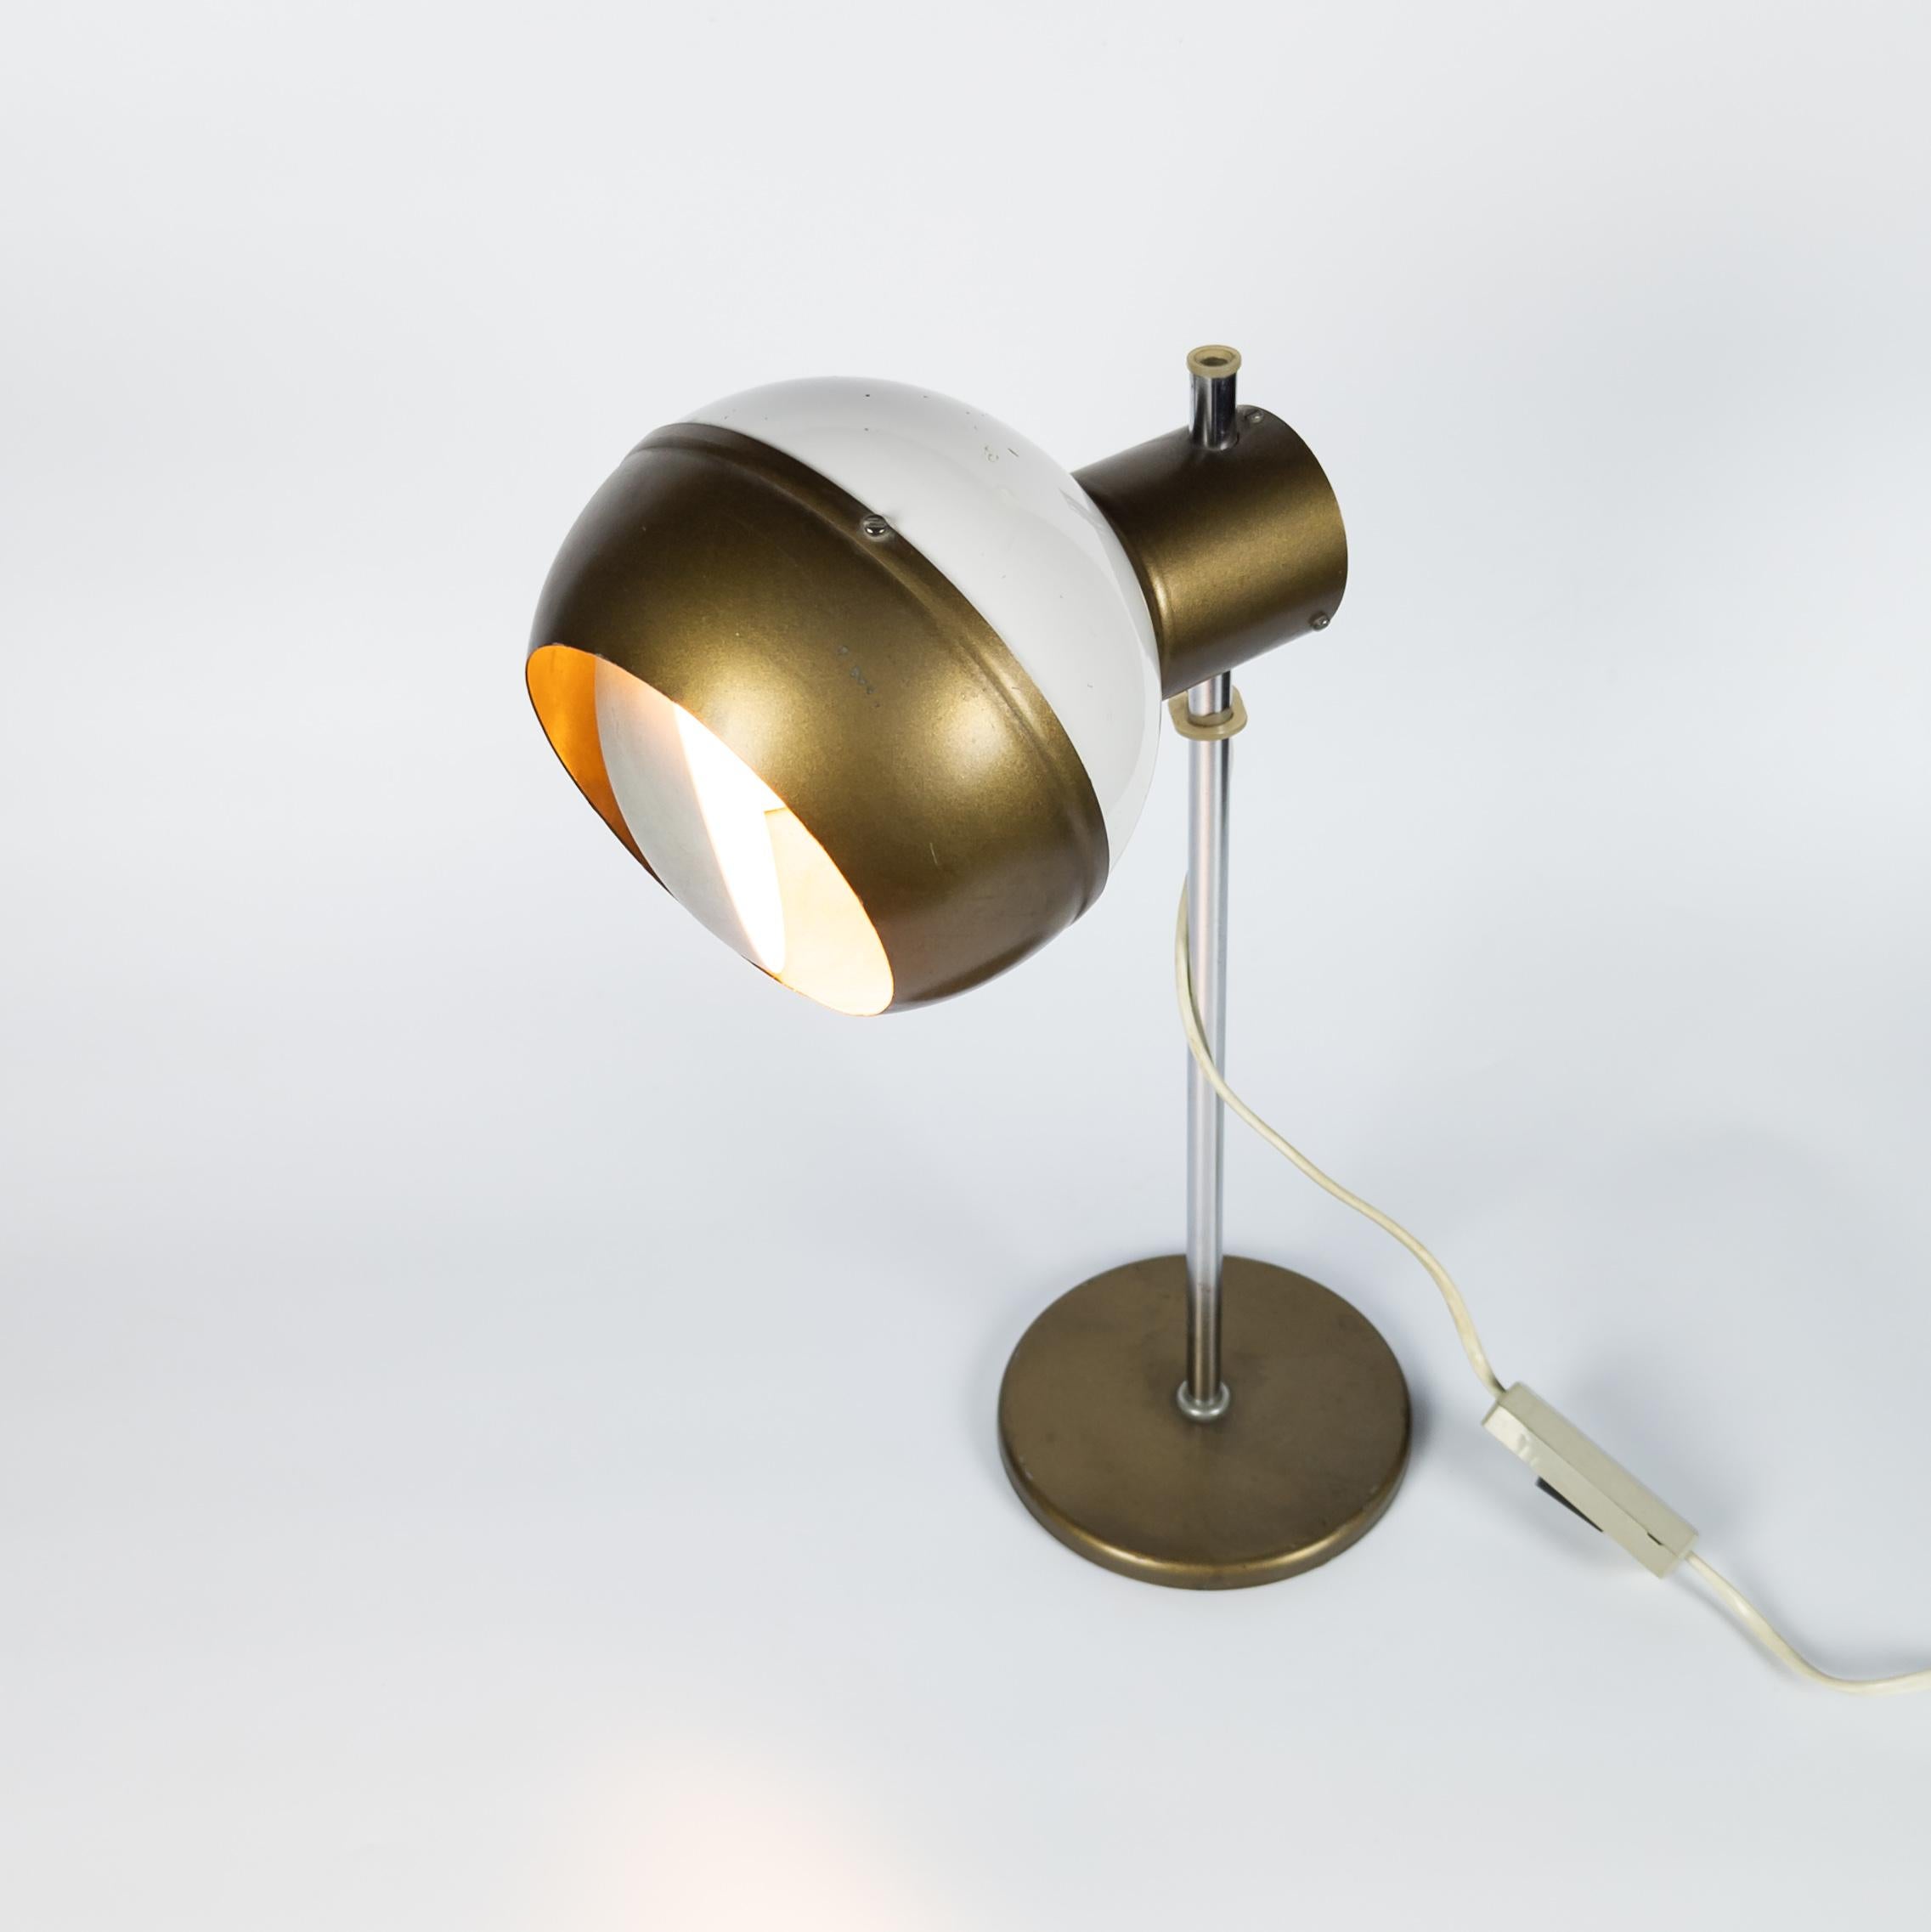 Czech Adjustable Space Age table Lamp by Drukov For Sale